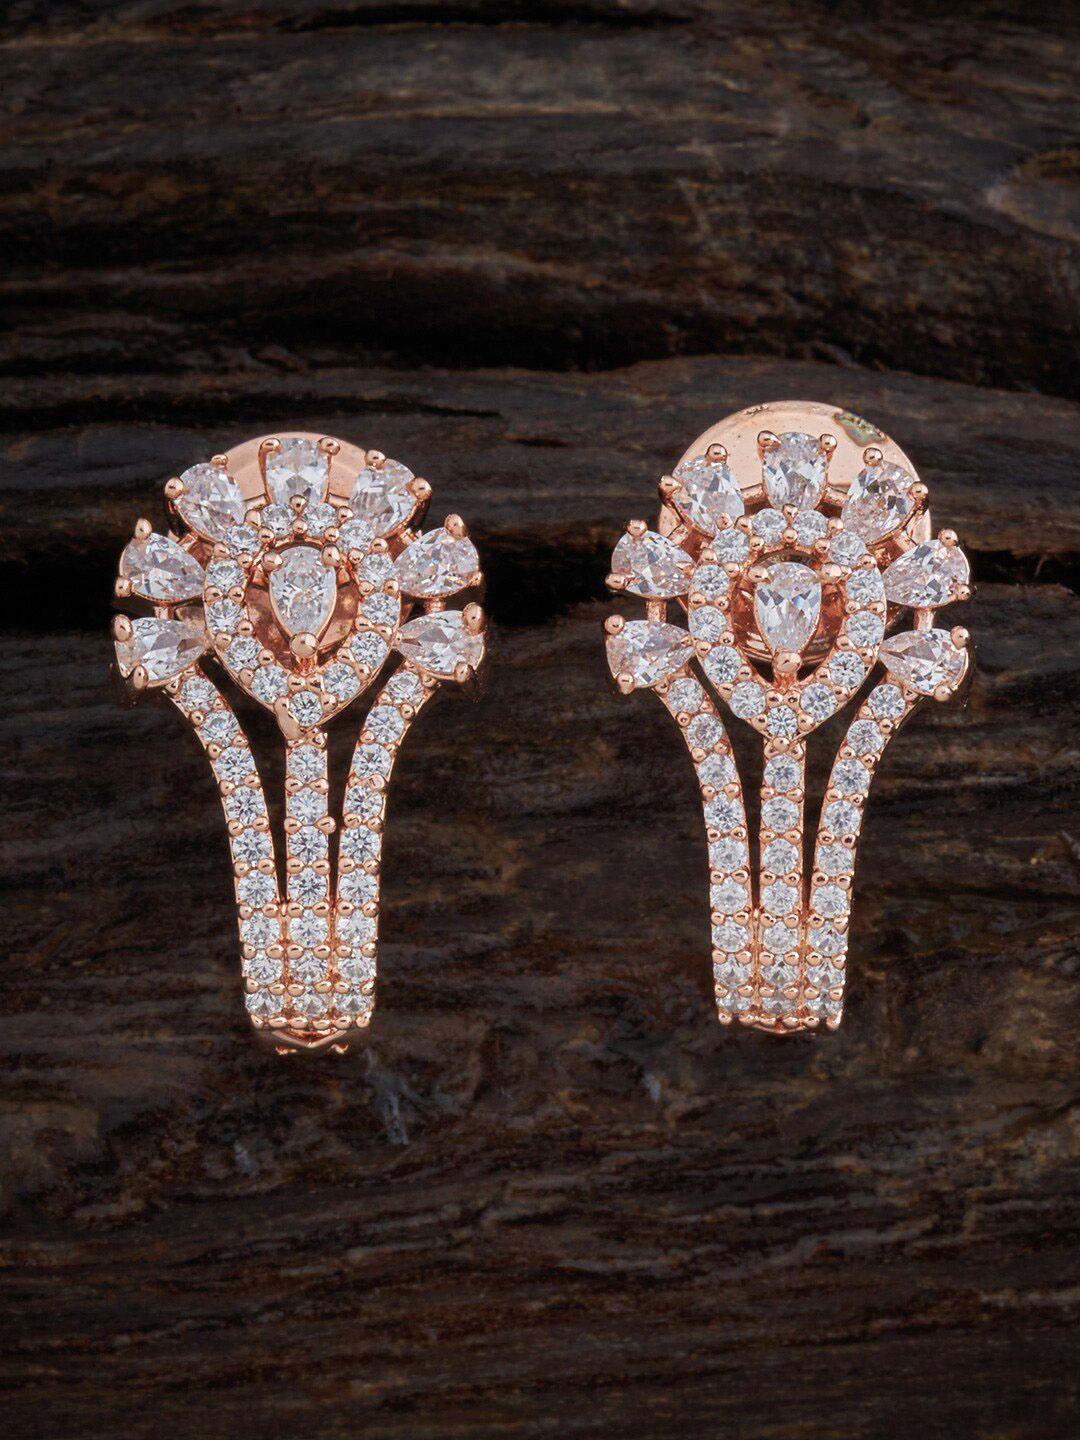 kushal's fashion jewellery rose-gold polish white floral studs earrings